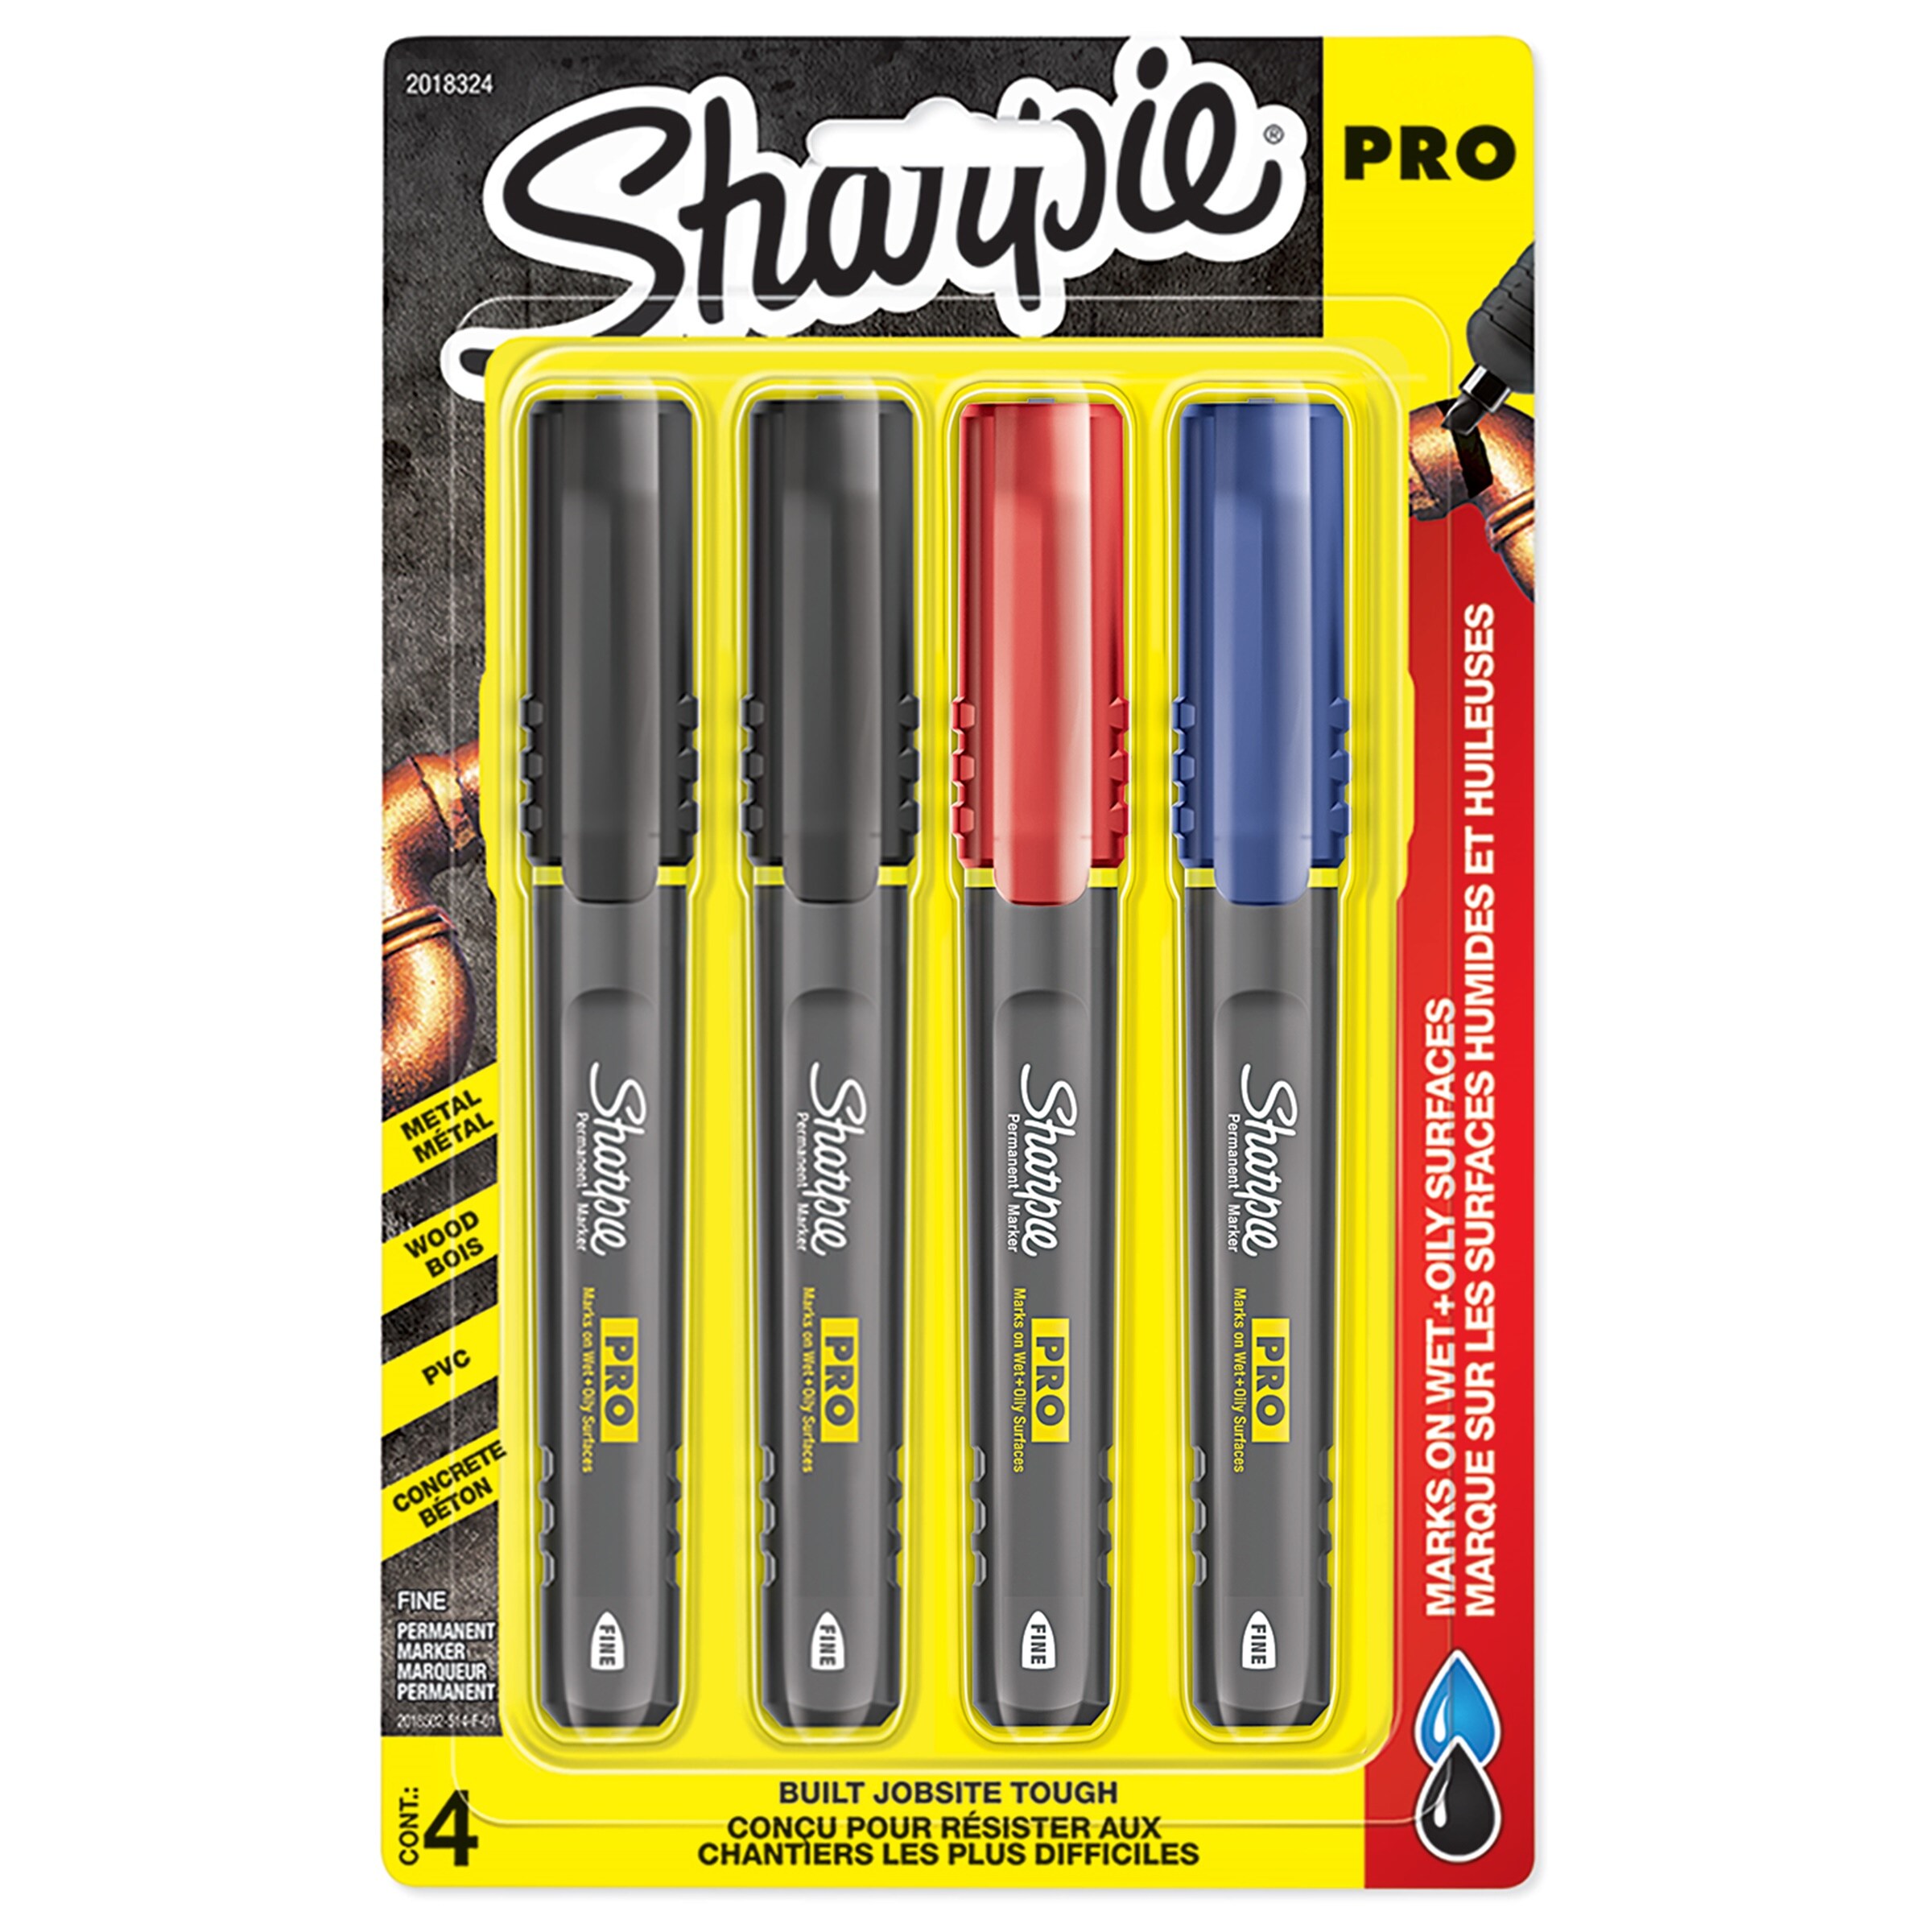 Sharpie Metallic Fine Point Permanent Markers, 6 Silver Markers (39108PP)